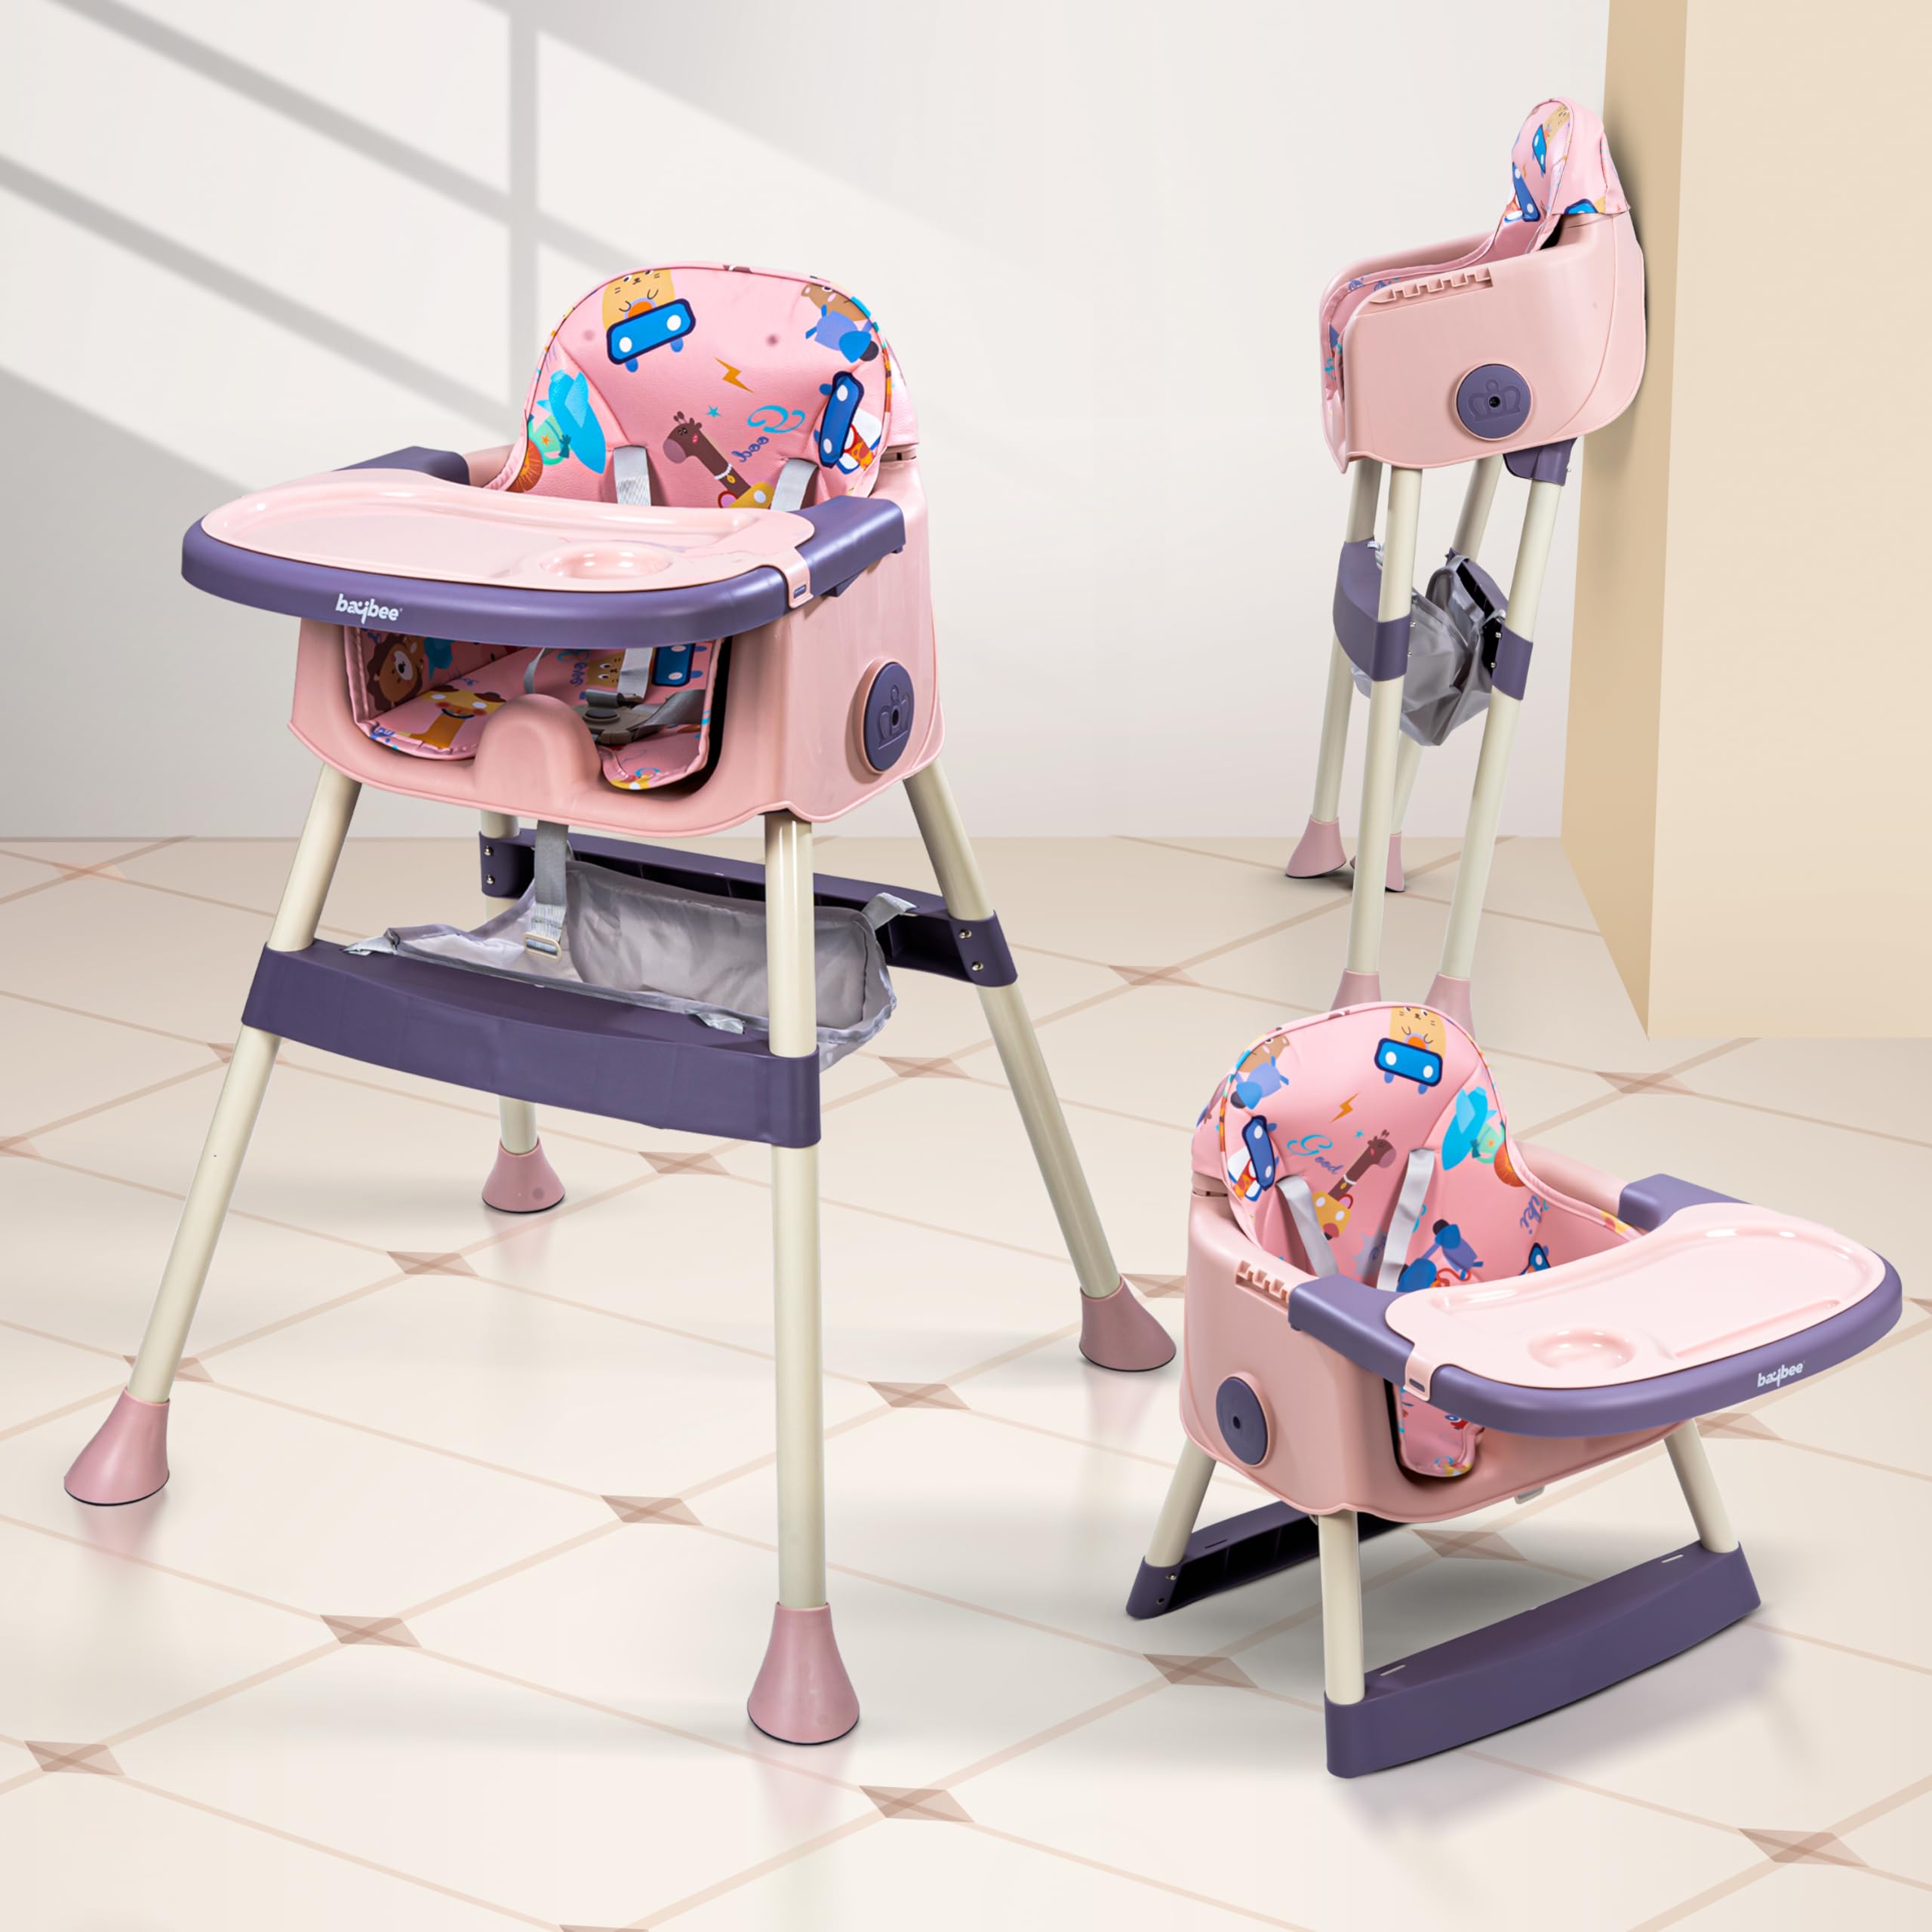 When Can Babies Use A High Chair?